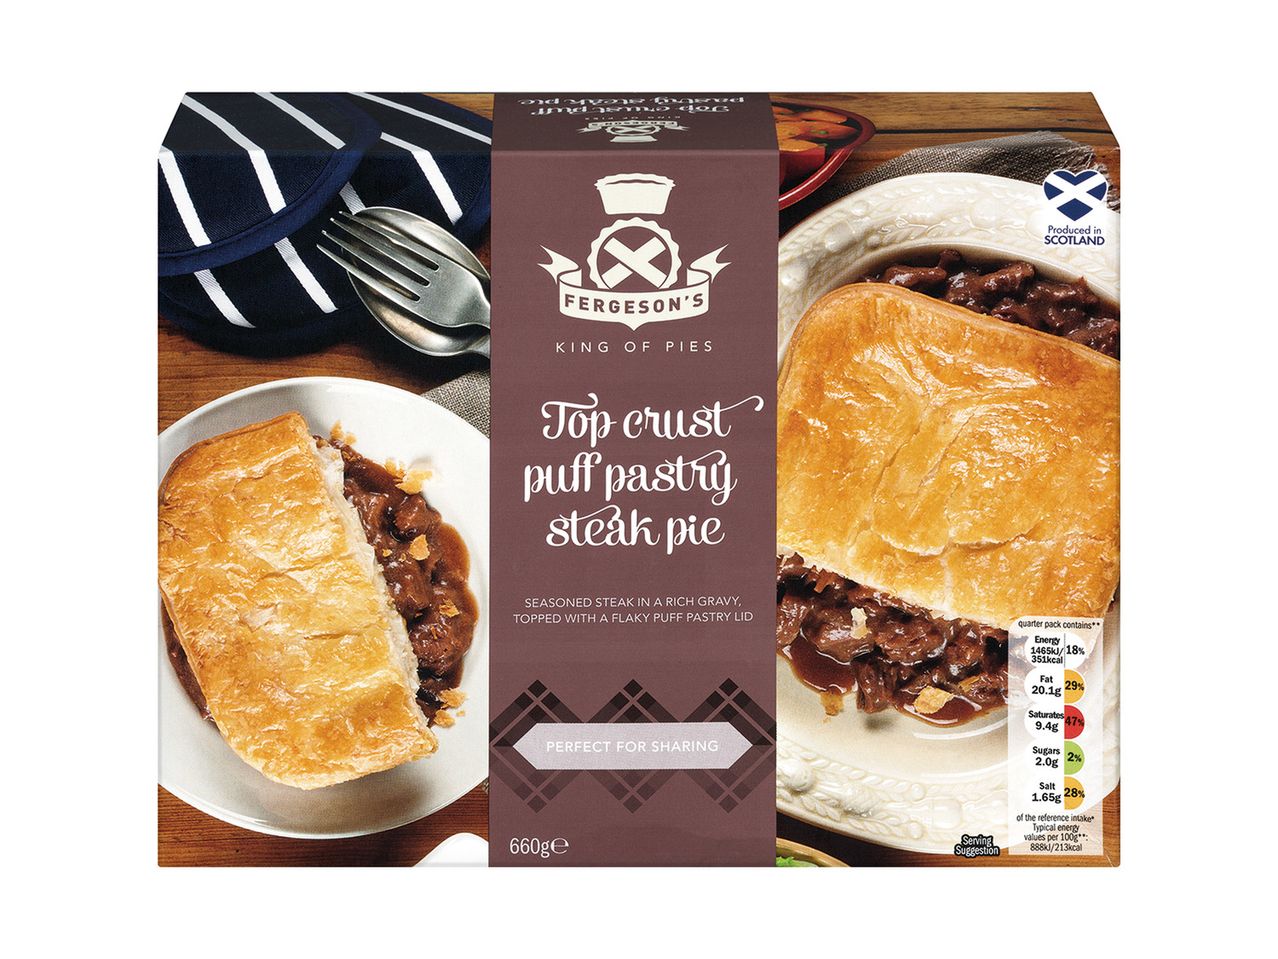 Go to full screen view: Fergeson's Traditional Scottish Steak Pie - Image 1